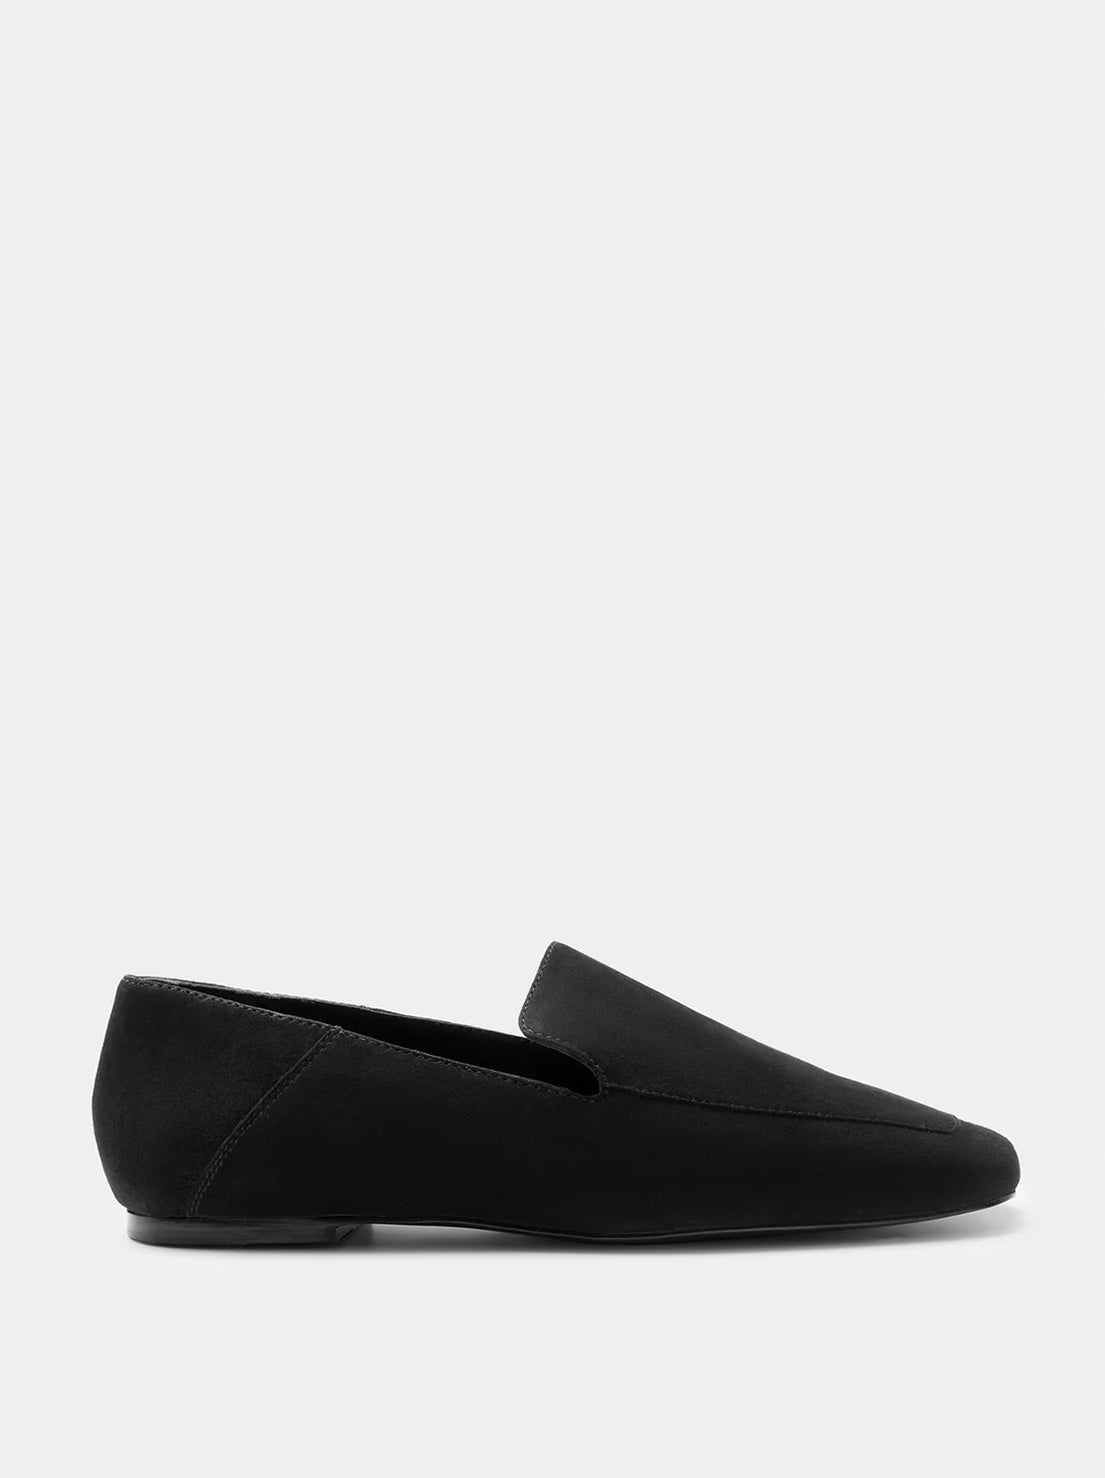 Assembly - Willow Suede Loafer - Black